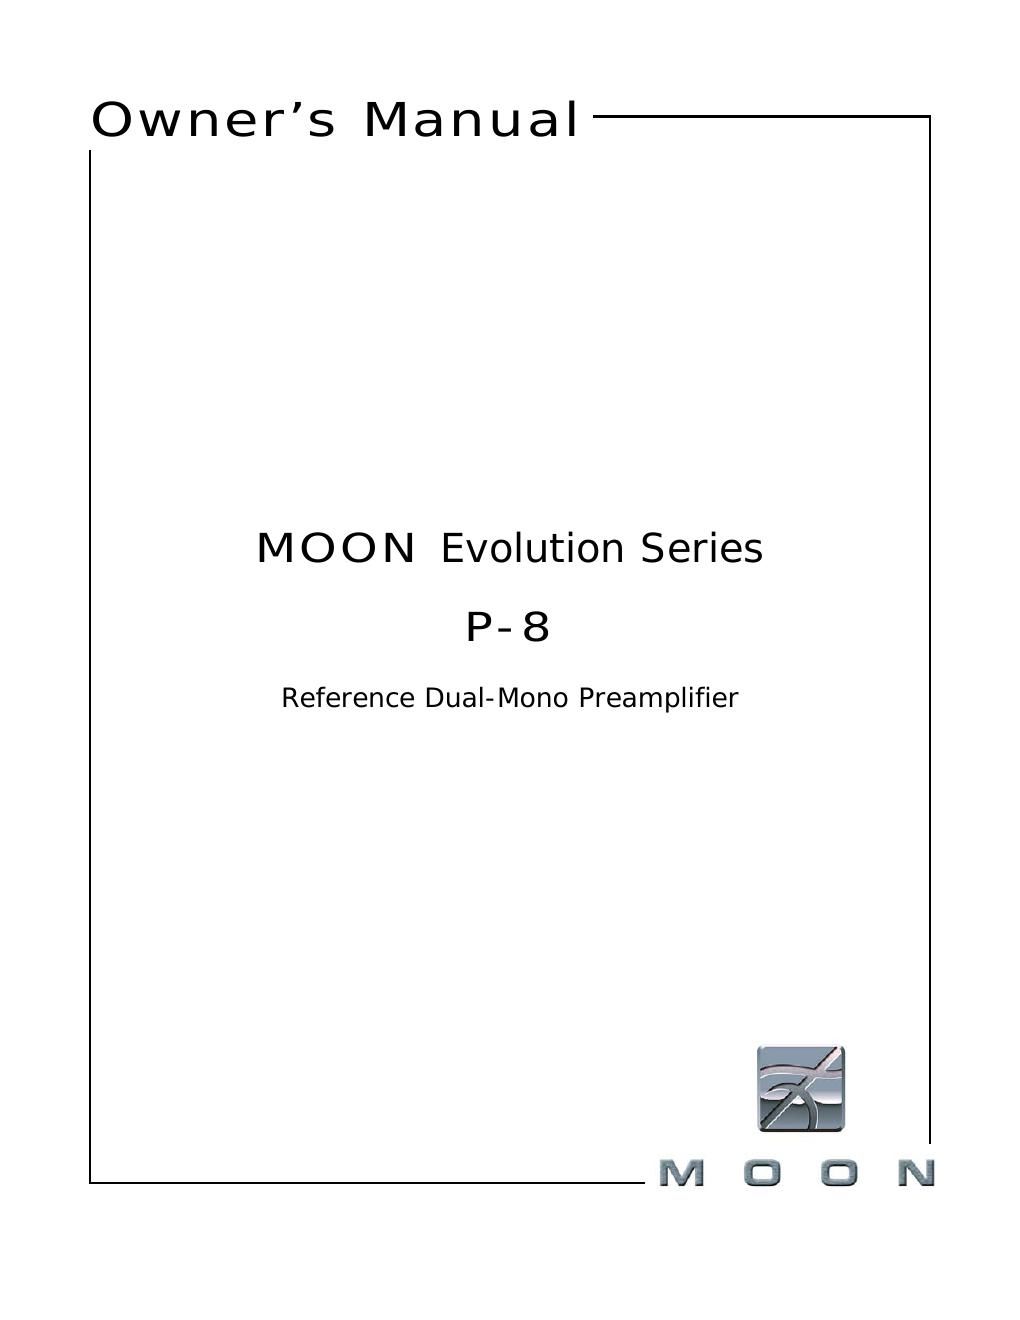 moon p 8 owners manual